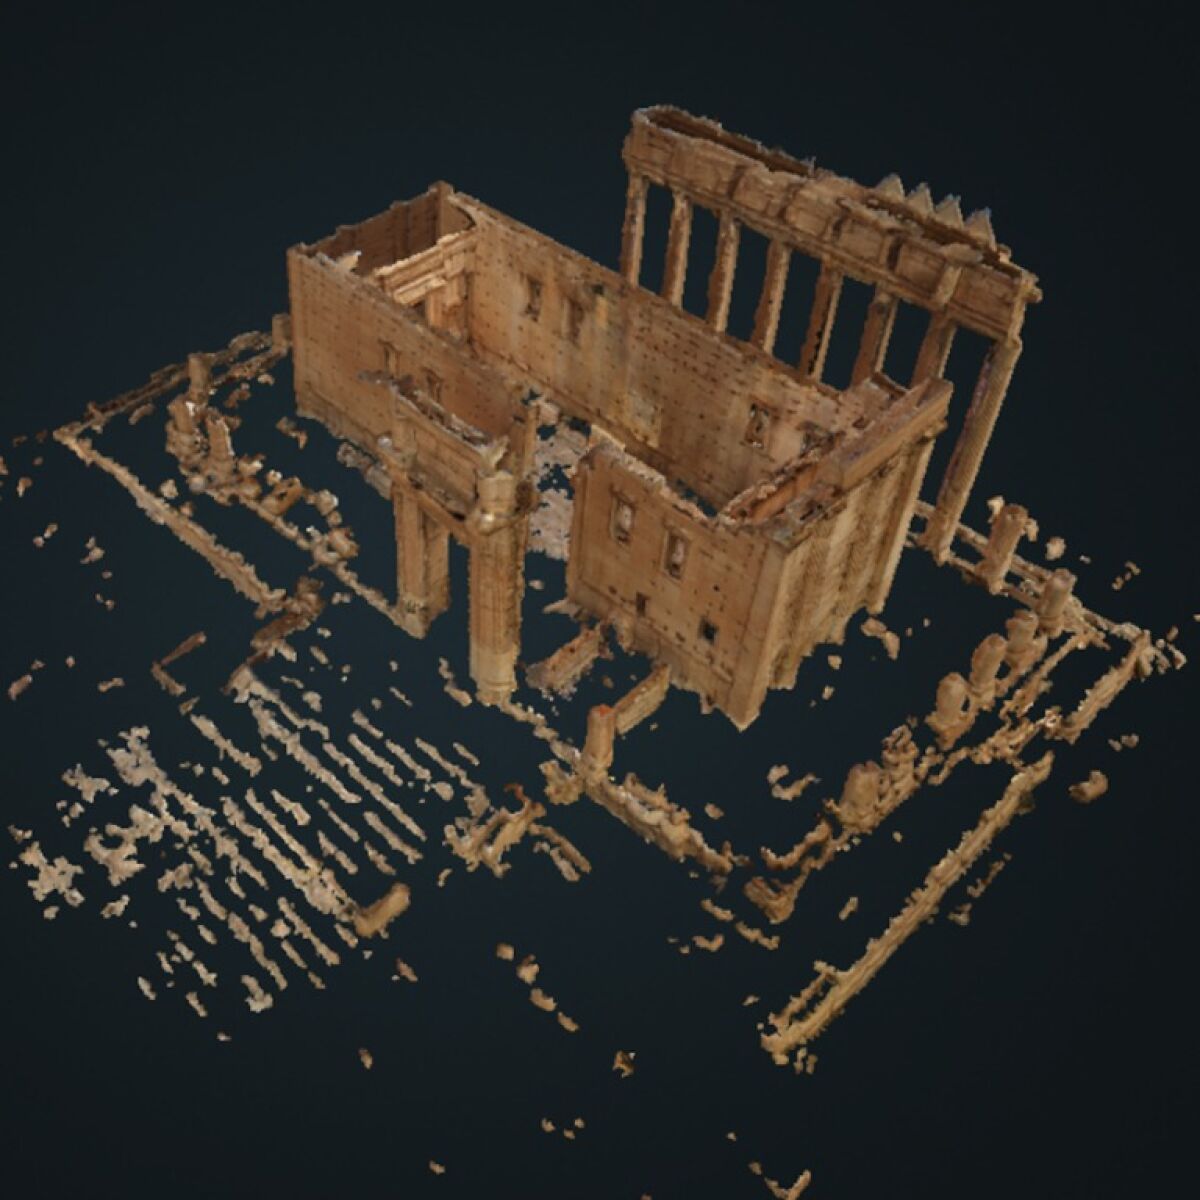 UCSD Library's Digital Media Lab created a 3-D digital reconstruction of Syria's Temple of Bel, which was destroyed in 2015.